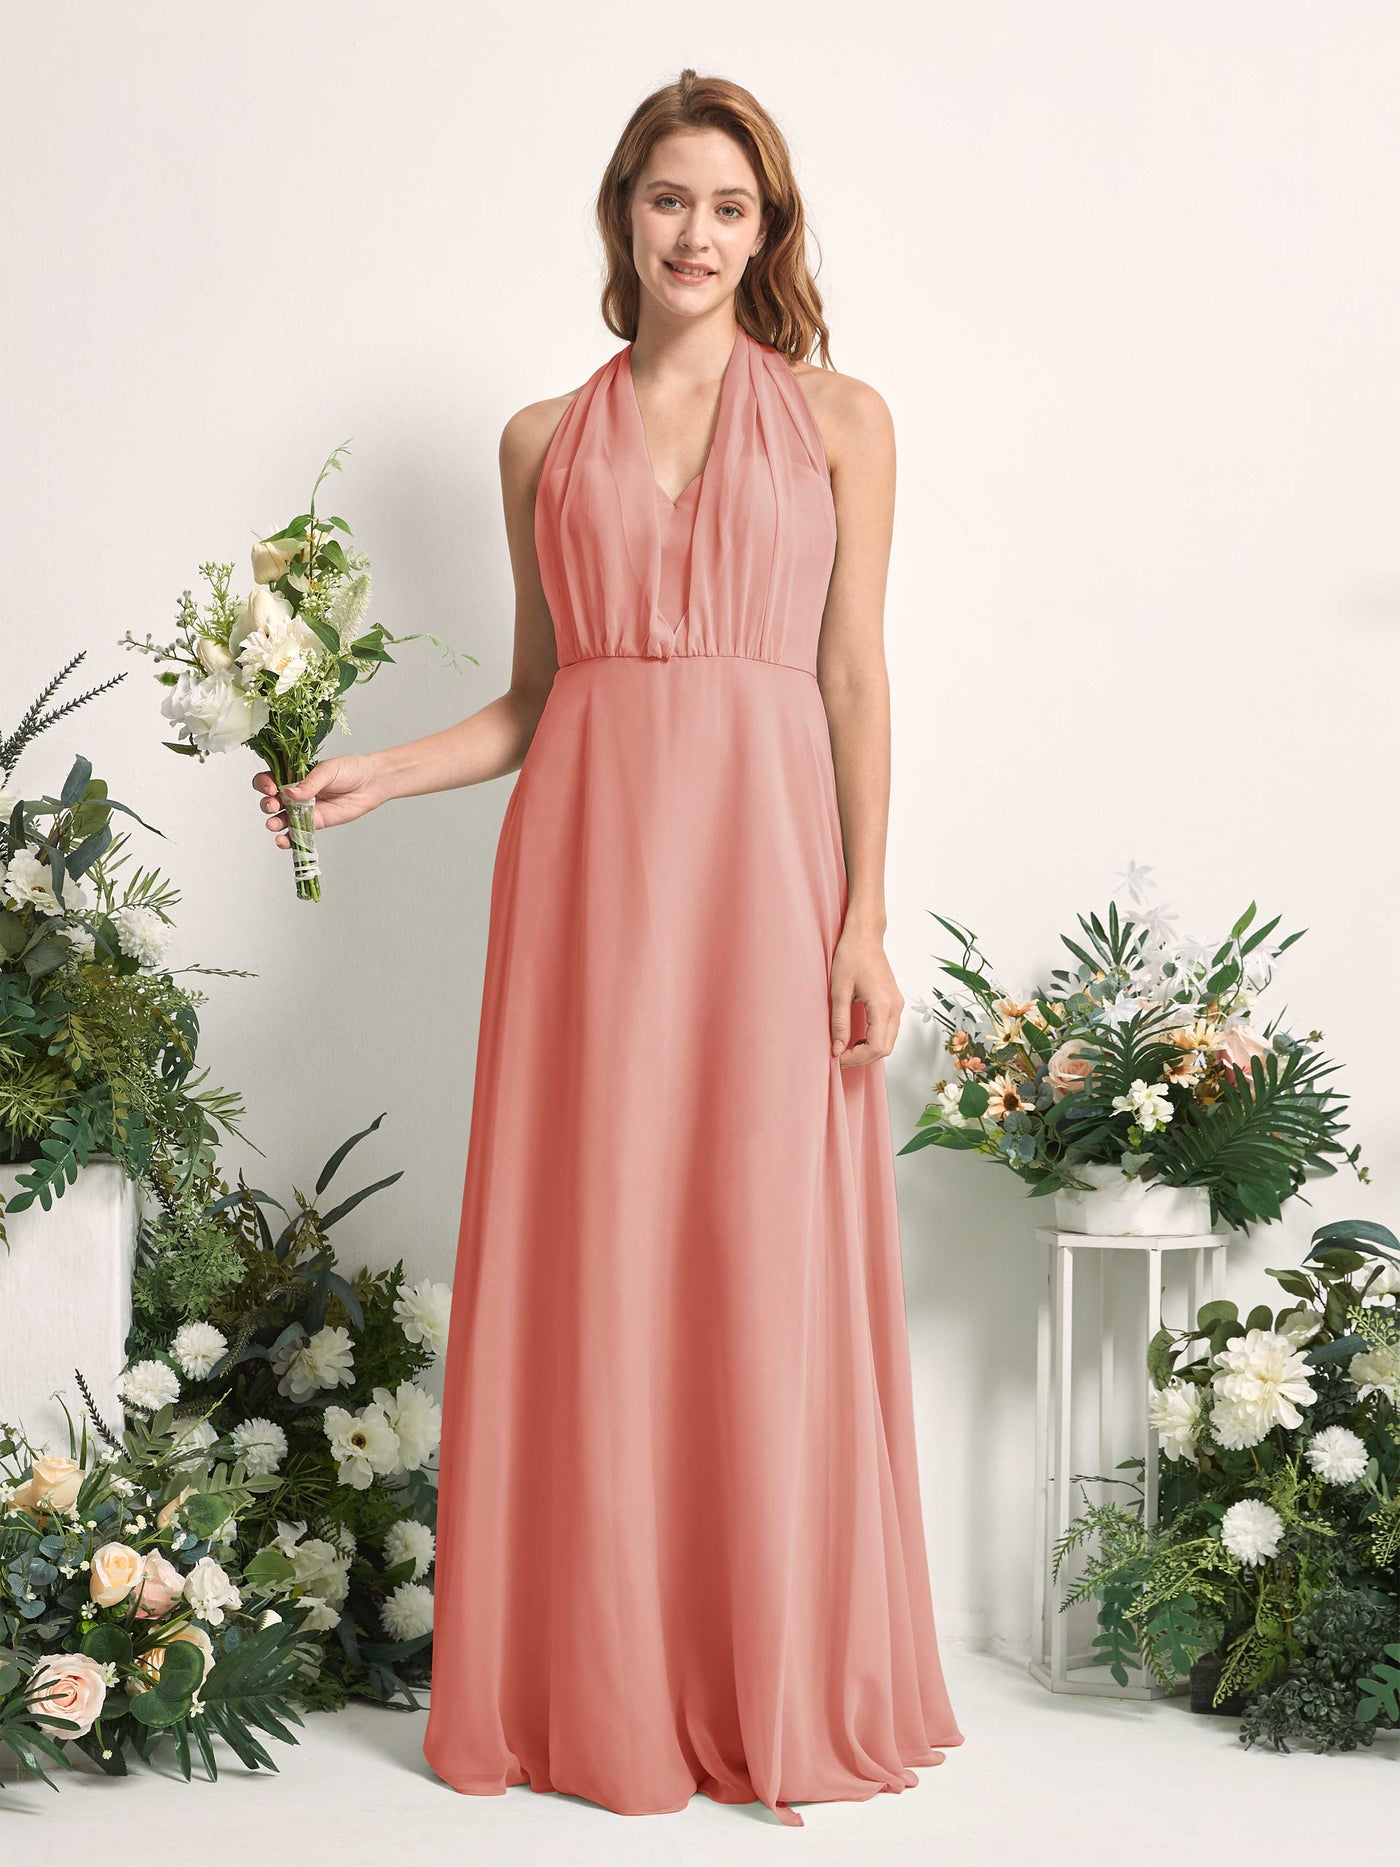 Champagne Rose Bridesmaid Dresses Bridesmaid Dress A-line Chiffon Halter Full Length Short Sleeves Wedding Party Dress (81226306)#color_champagne-rose